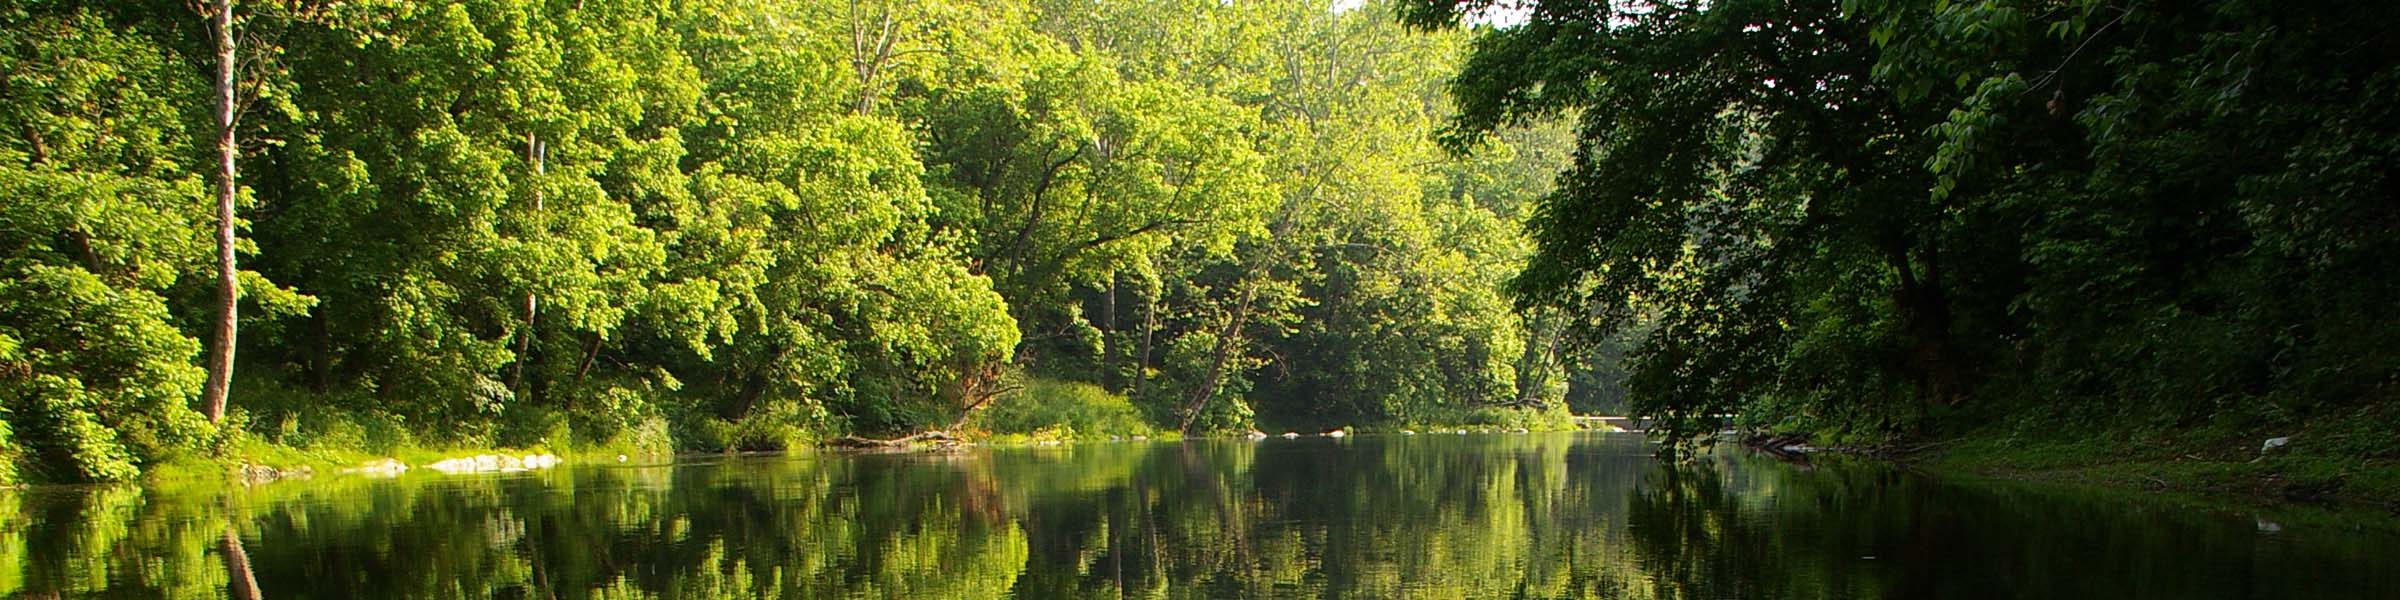 Image Of The North Fork Of The Shenandoah River With Sky Reflected In Water